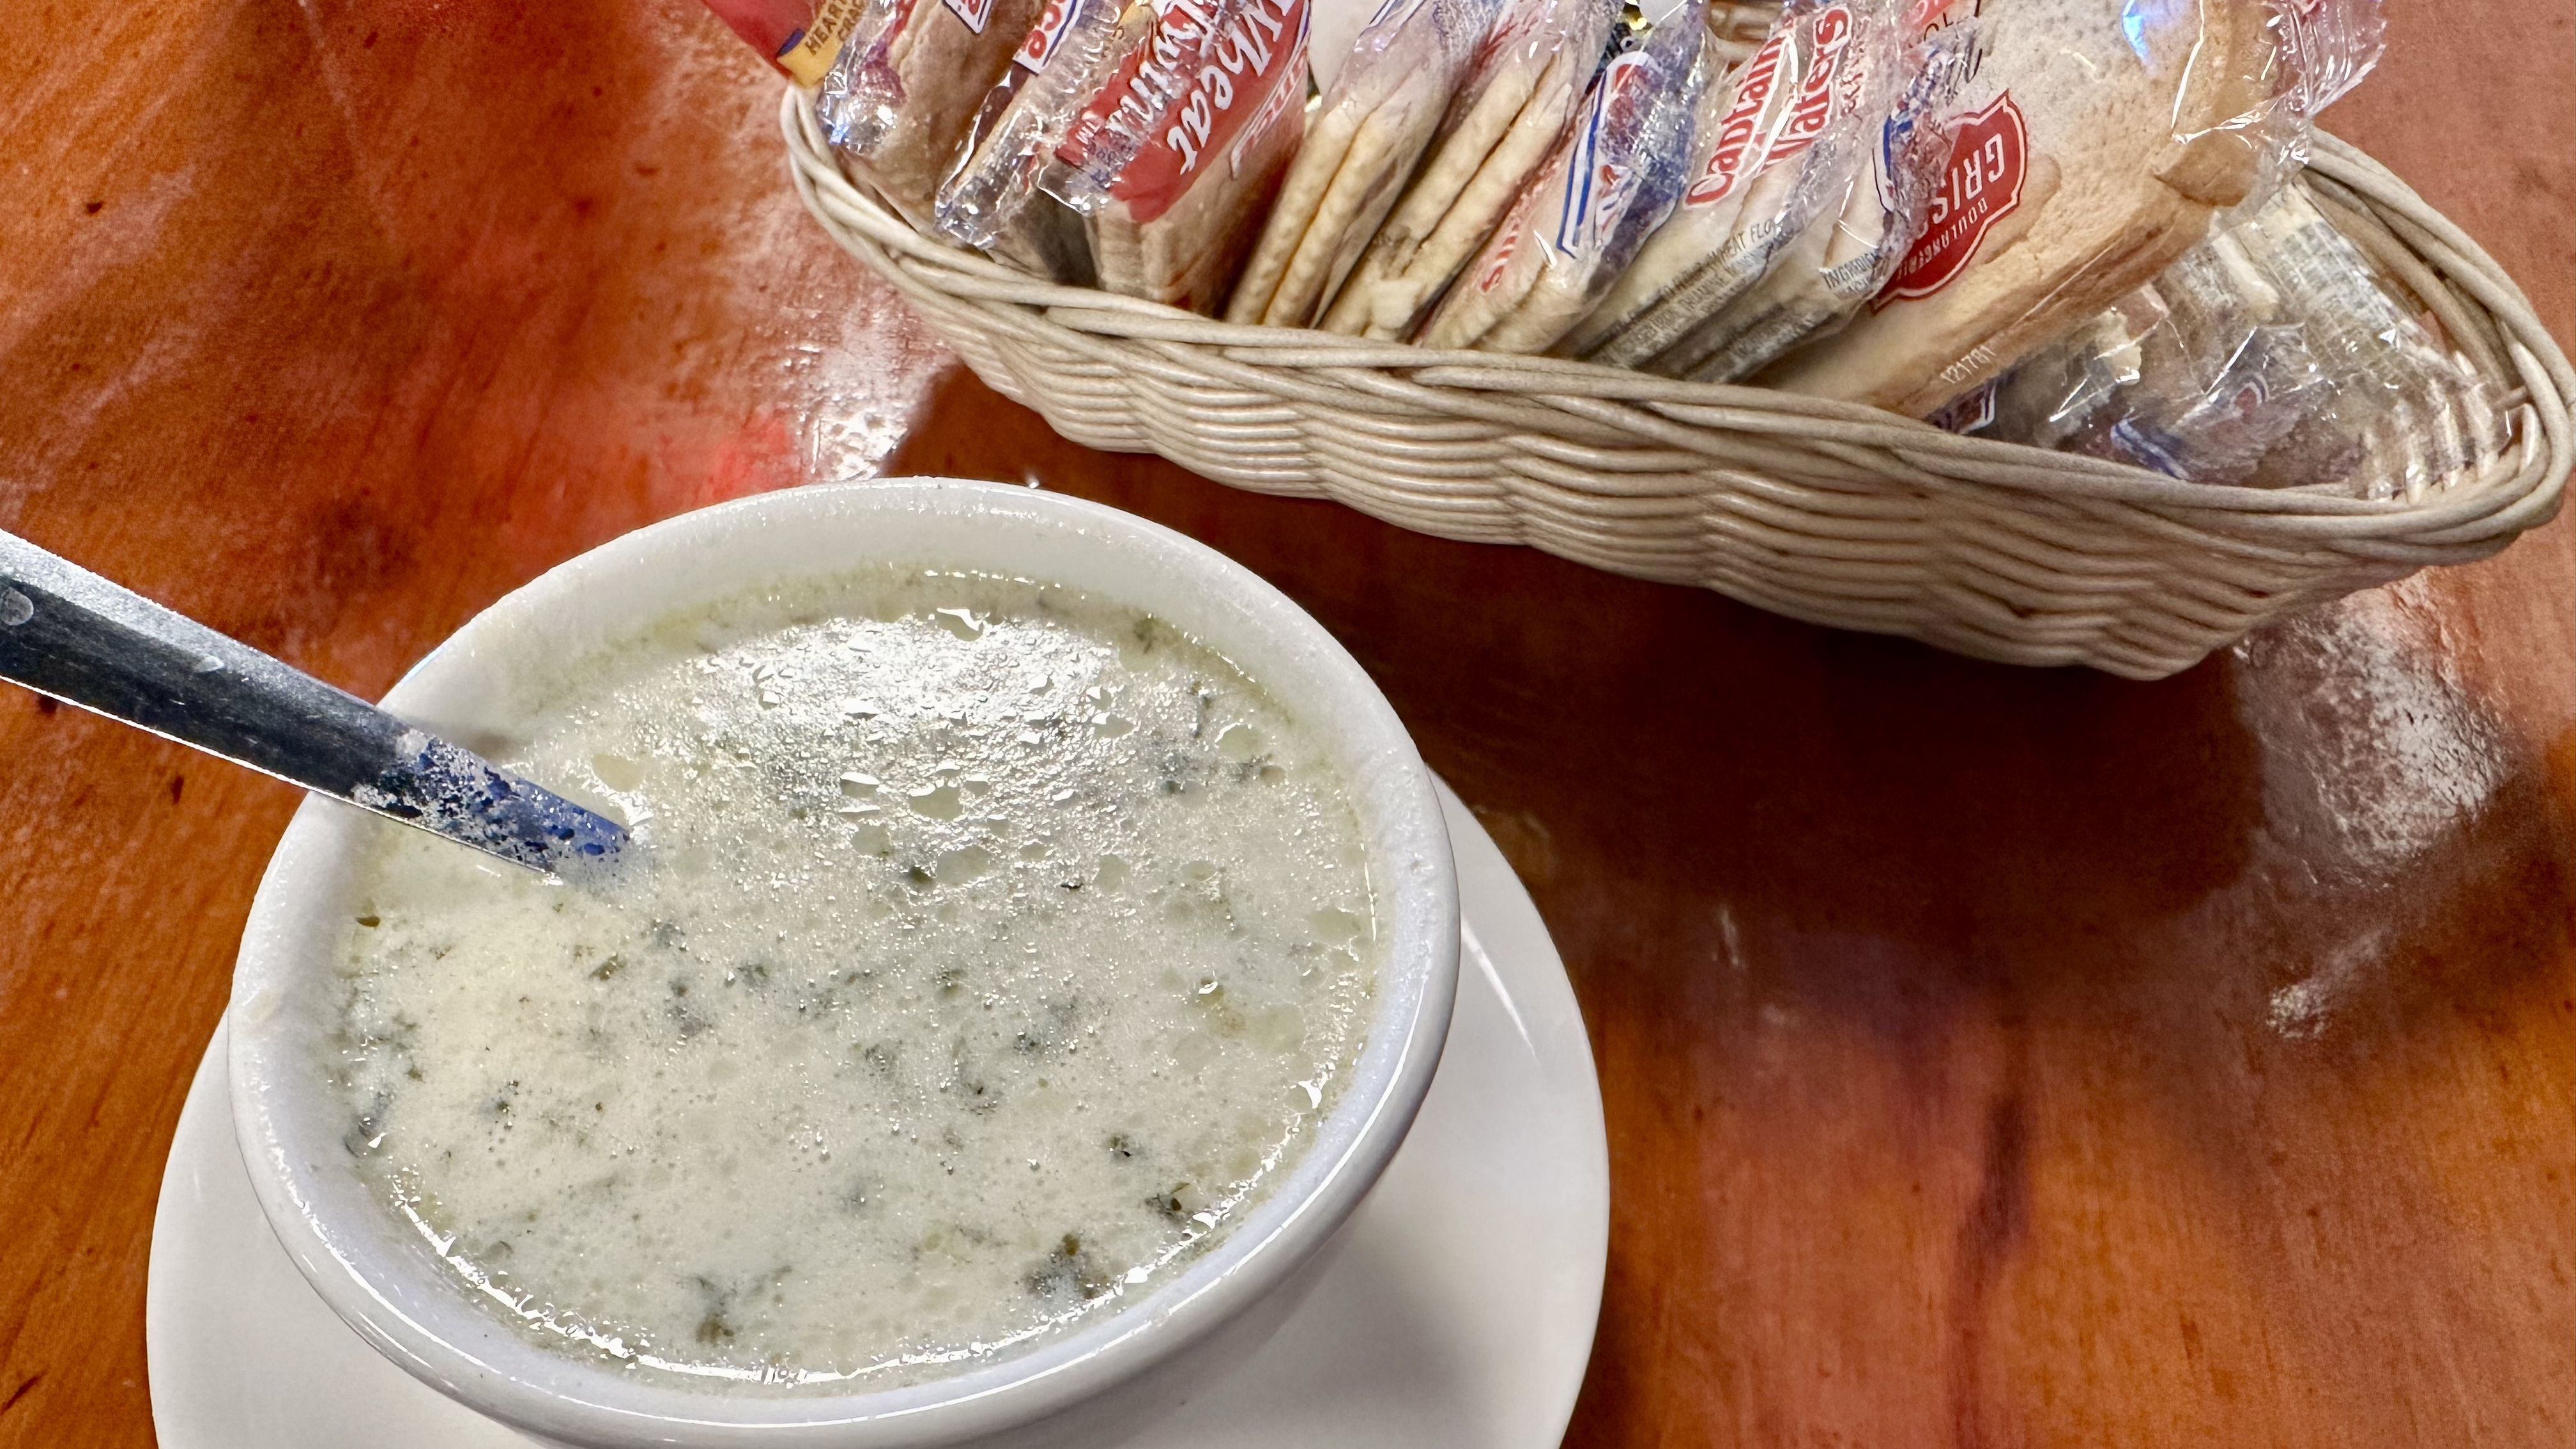 Photo shows a bowl of a cream-based oyster soup at R&Os.